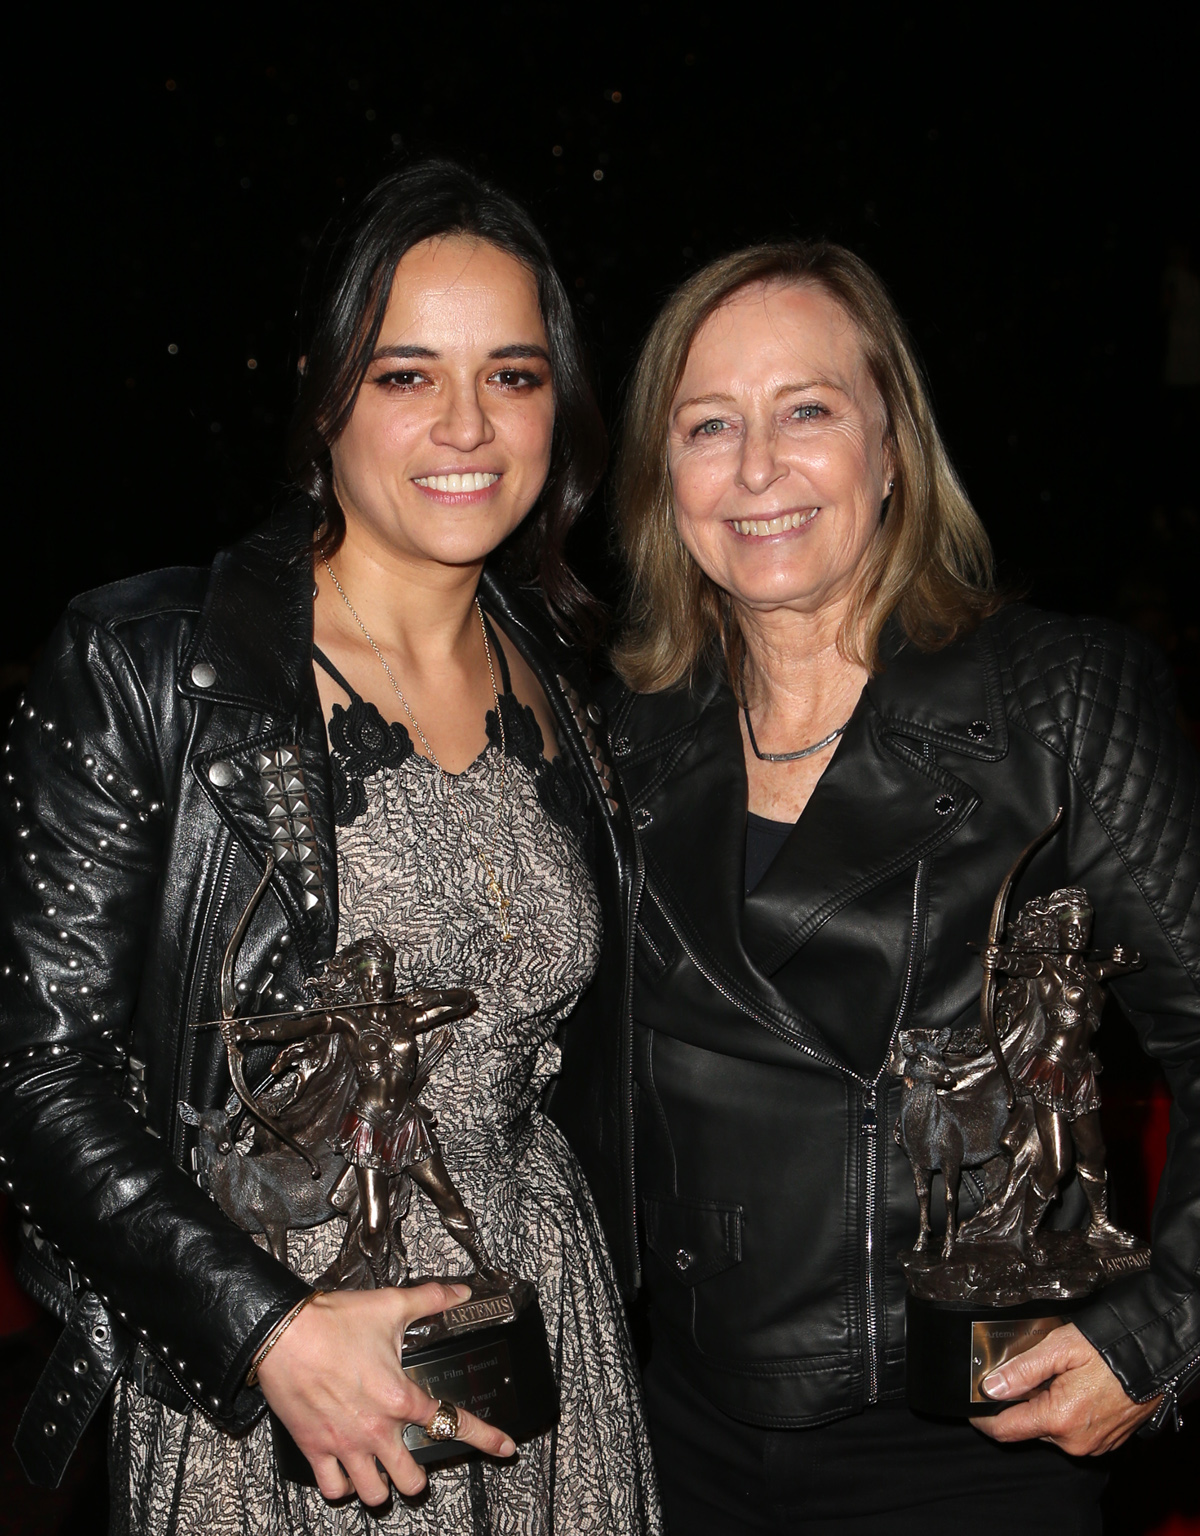 BEVERLY HILLS, CA - APRIL 26: Michelle Rodriguez, Debbie Evans, at the 2018 Artemis Awards Gala at the Ahrya Fine Arts Theater in Beverly Hills, California on April 26, 2018. Credit: Faye Sadou/MediaPunch